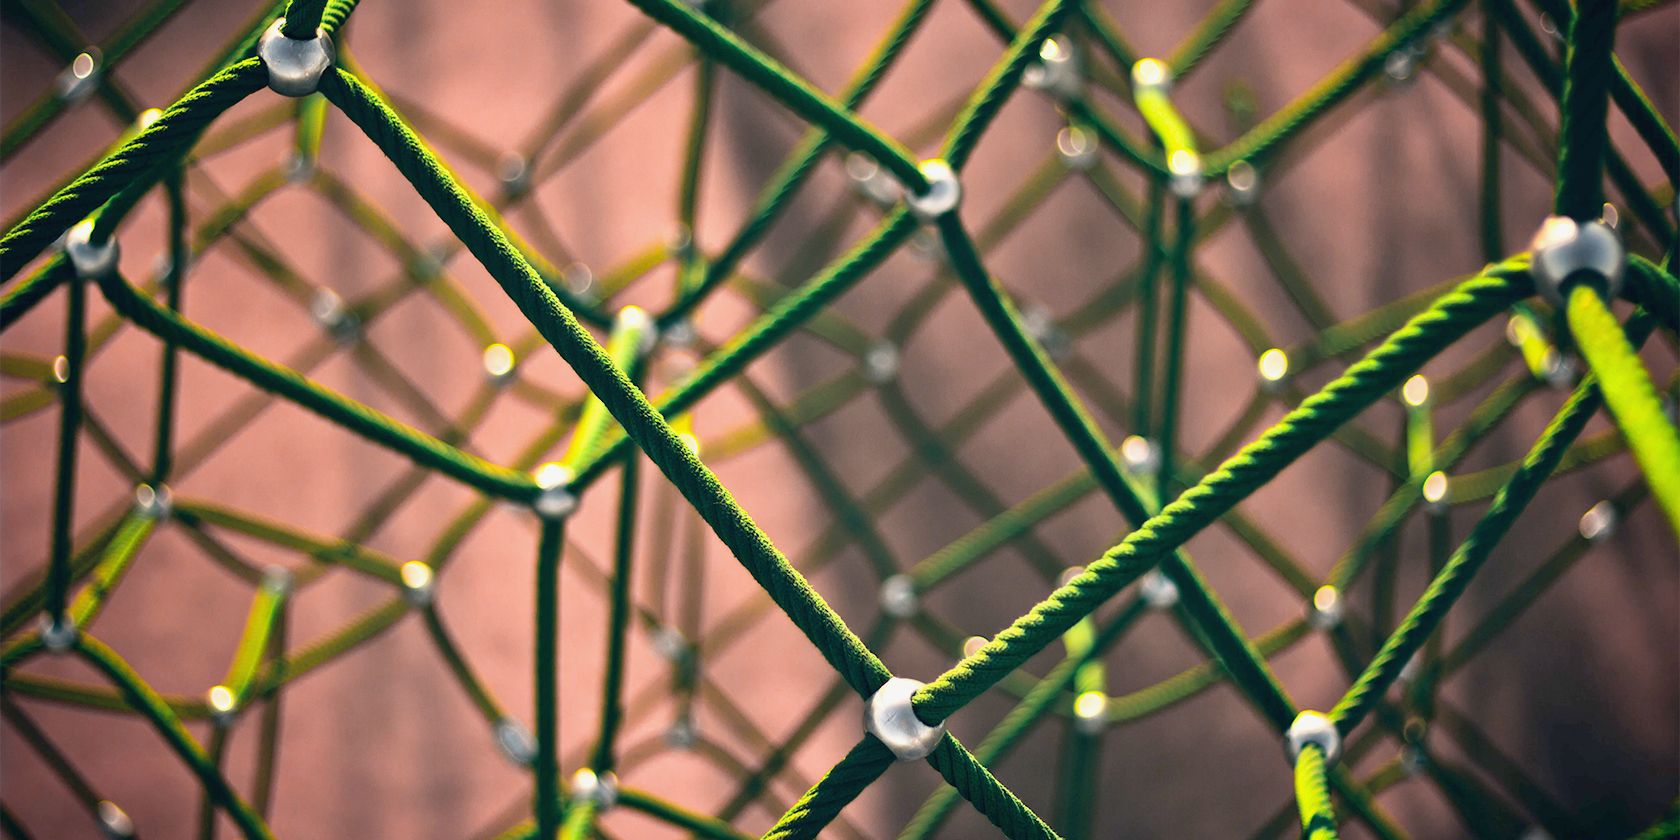 green ropes in a mesh pattern